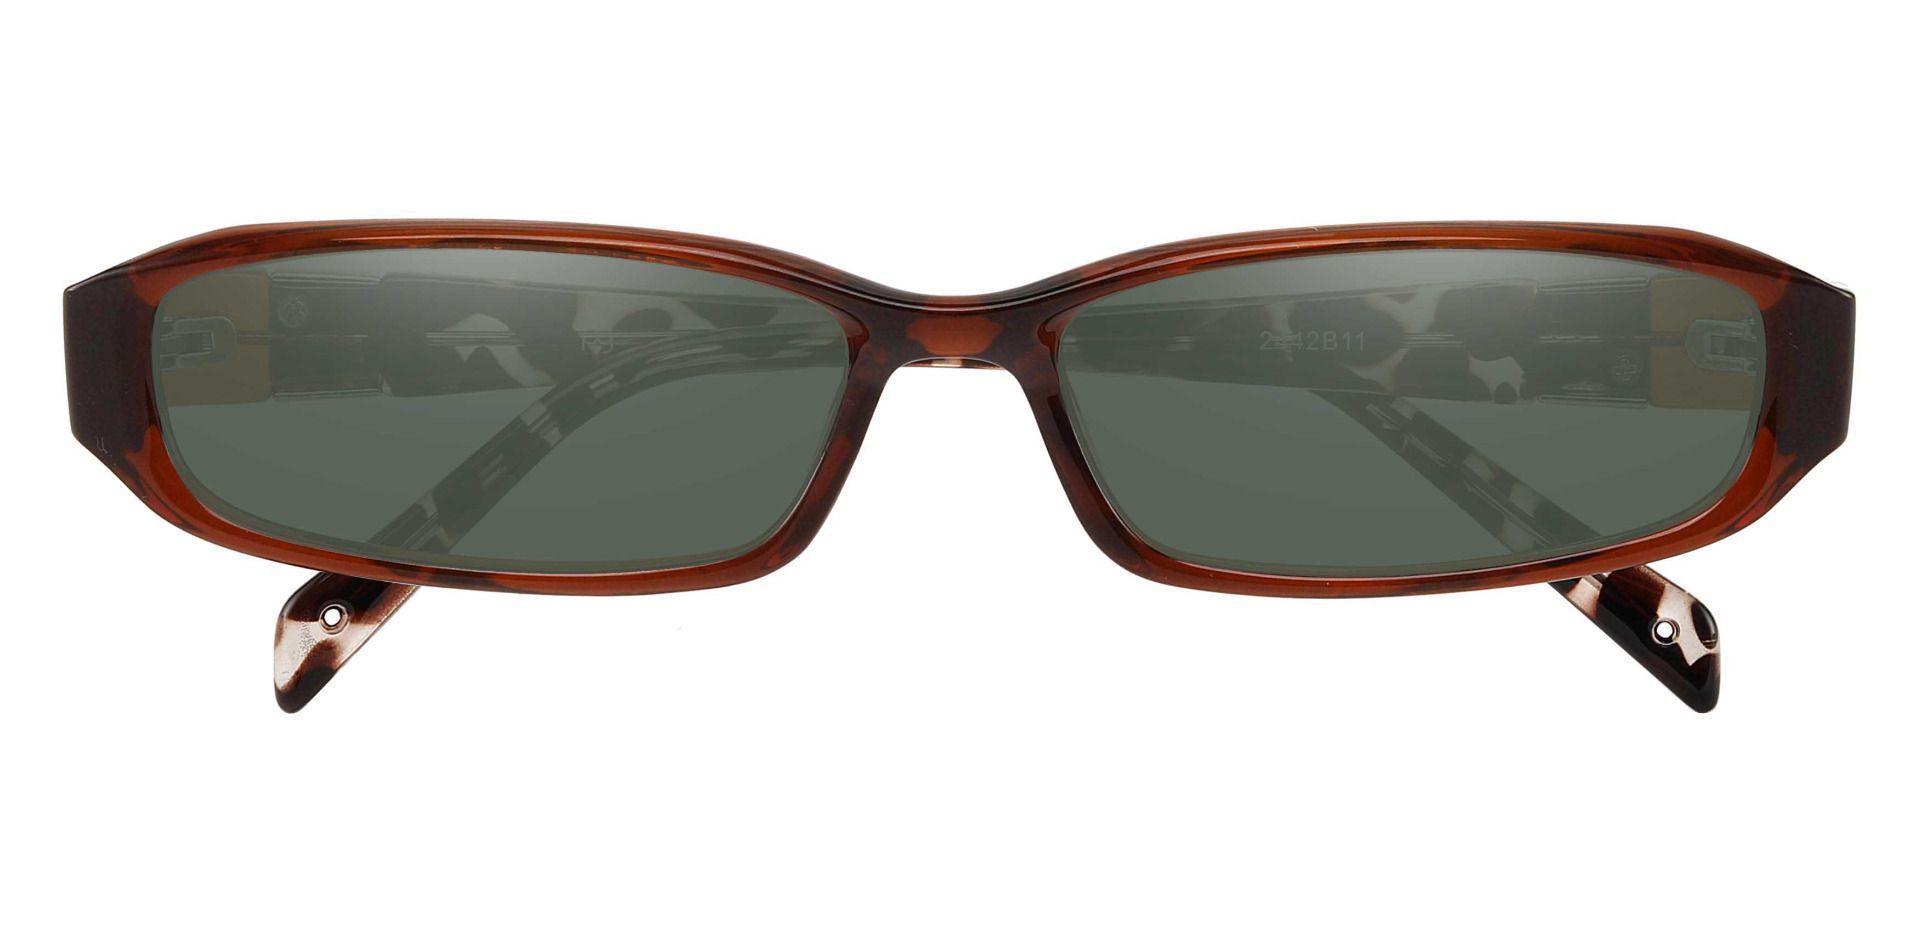 Mulberry Rectangle Non-Rx Sunglasses - Brown Frame With Green Lenses